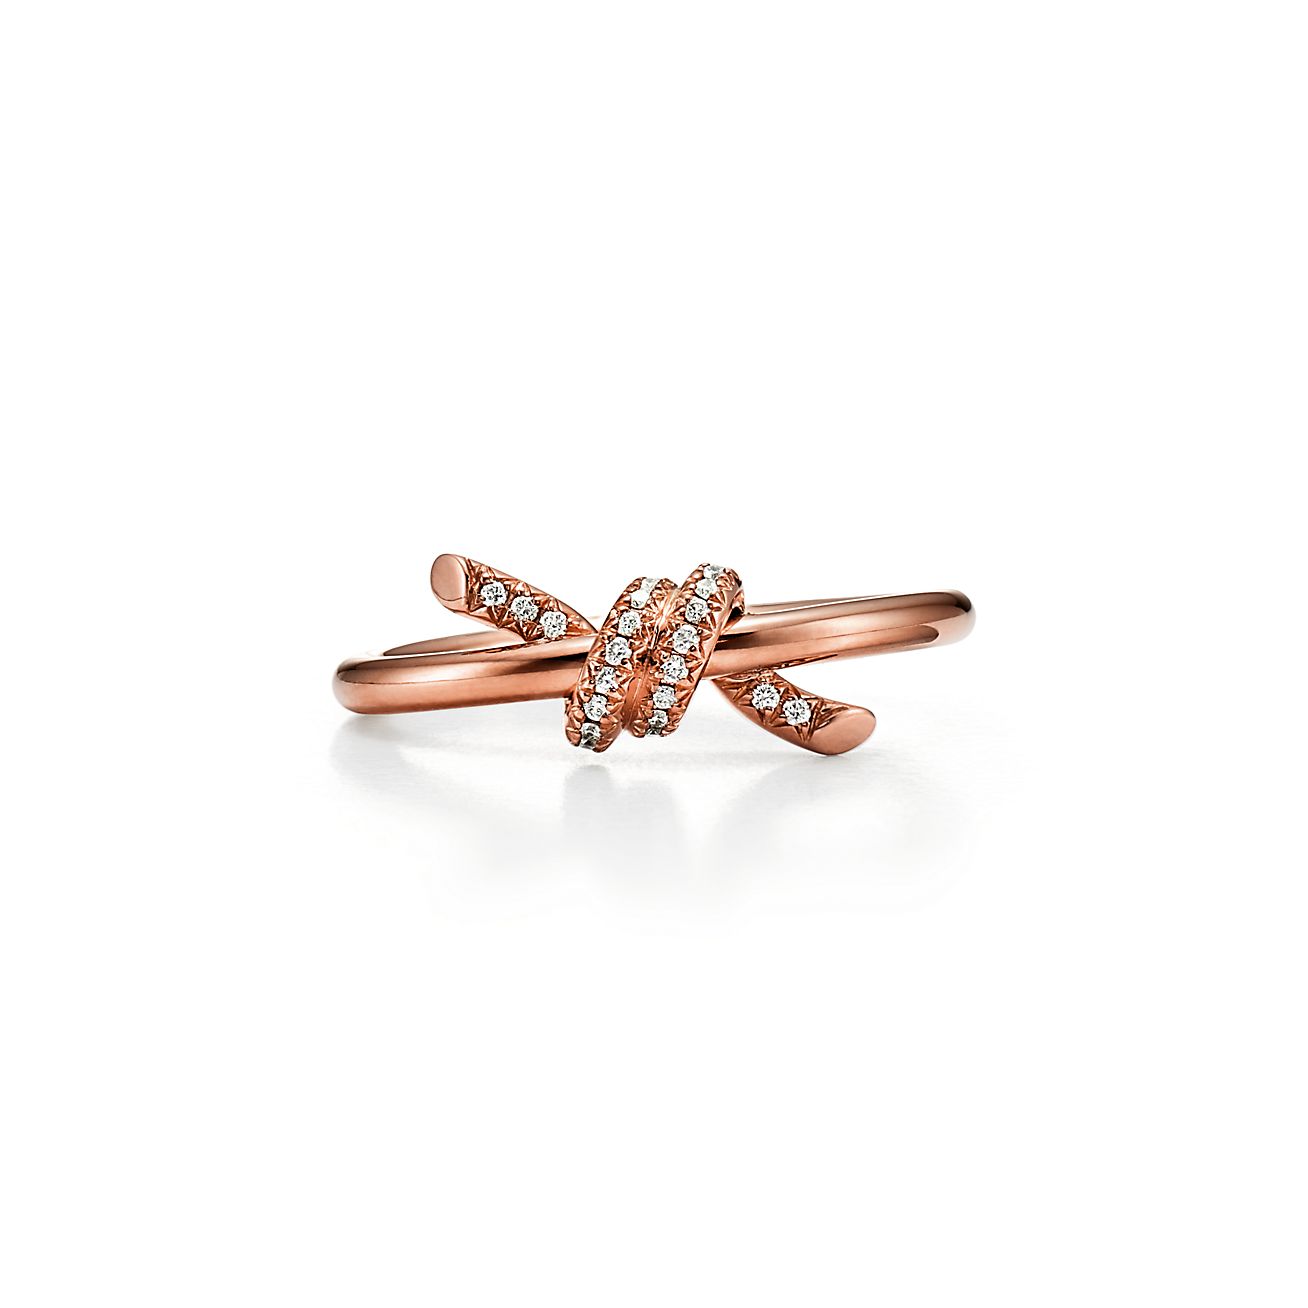 Tiffany Knot Ring in Rose Gold with Diamonds | Tiffany & Co.